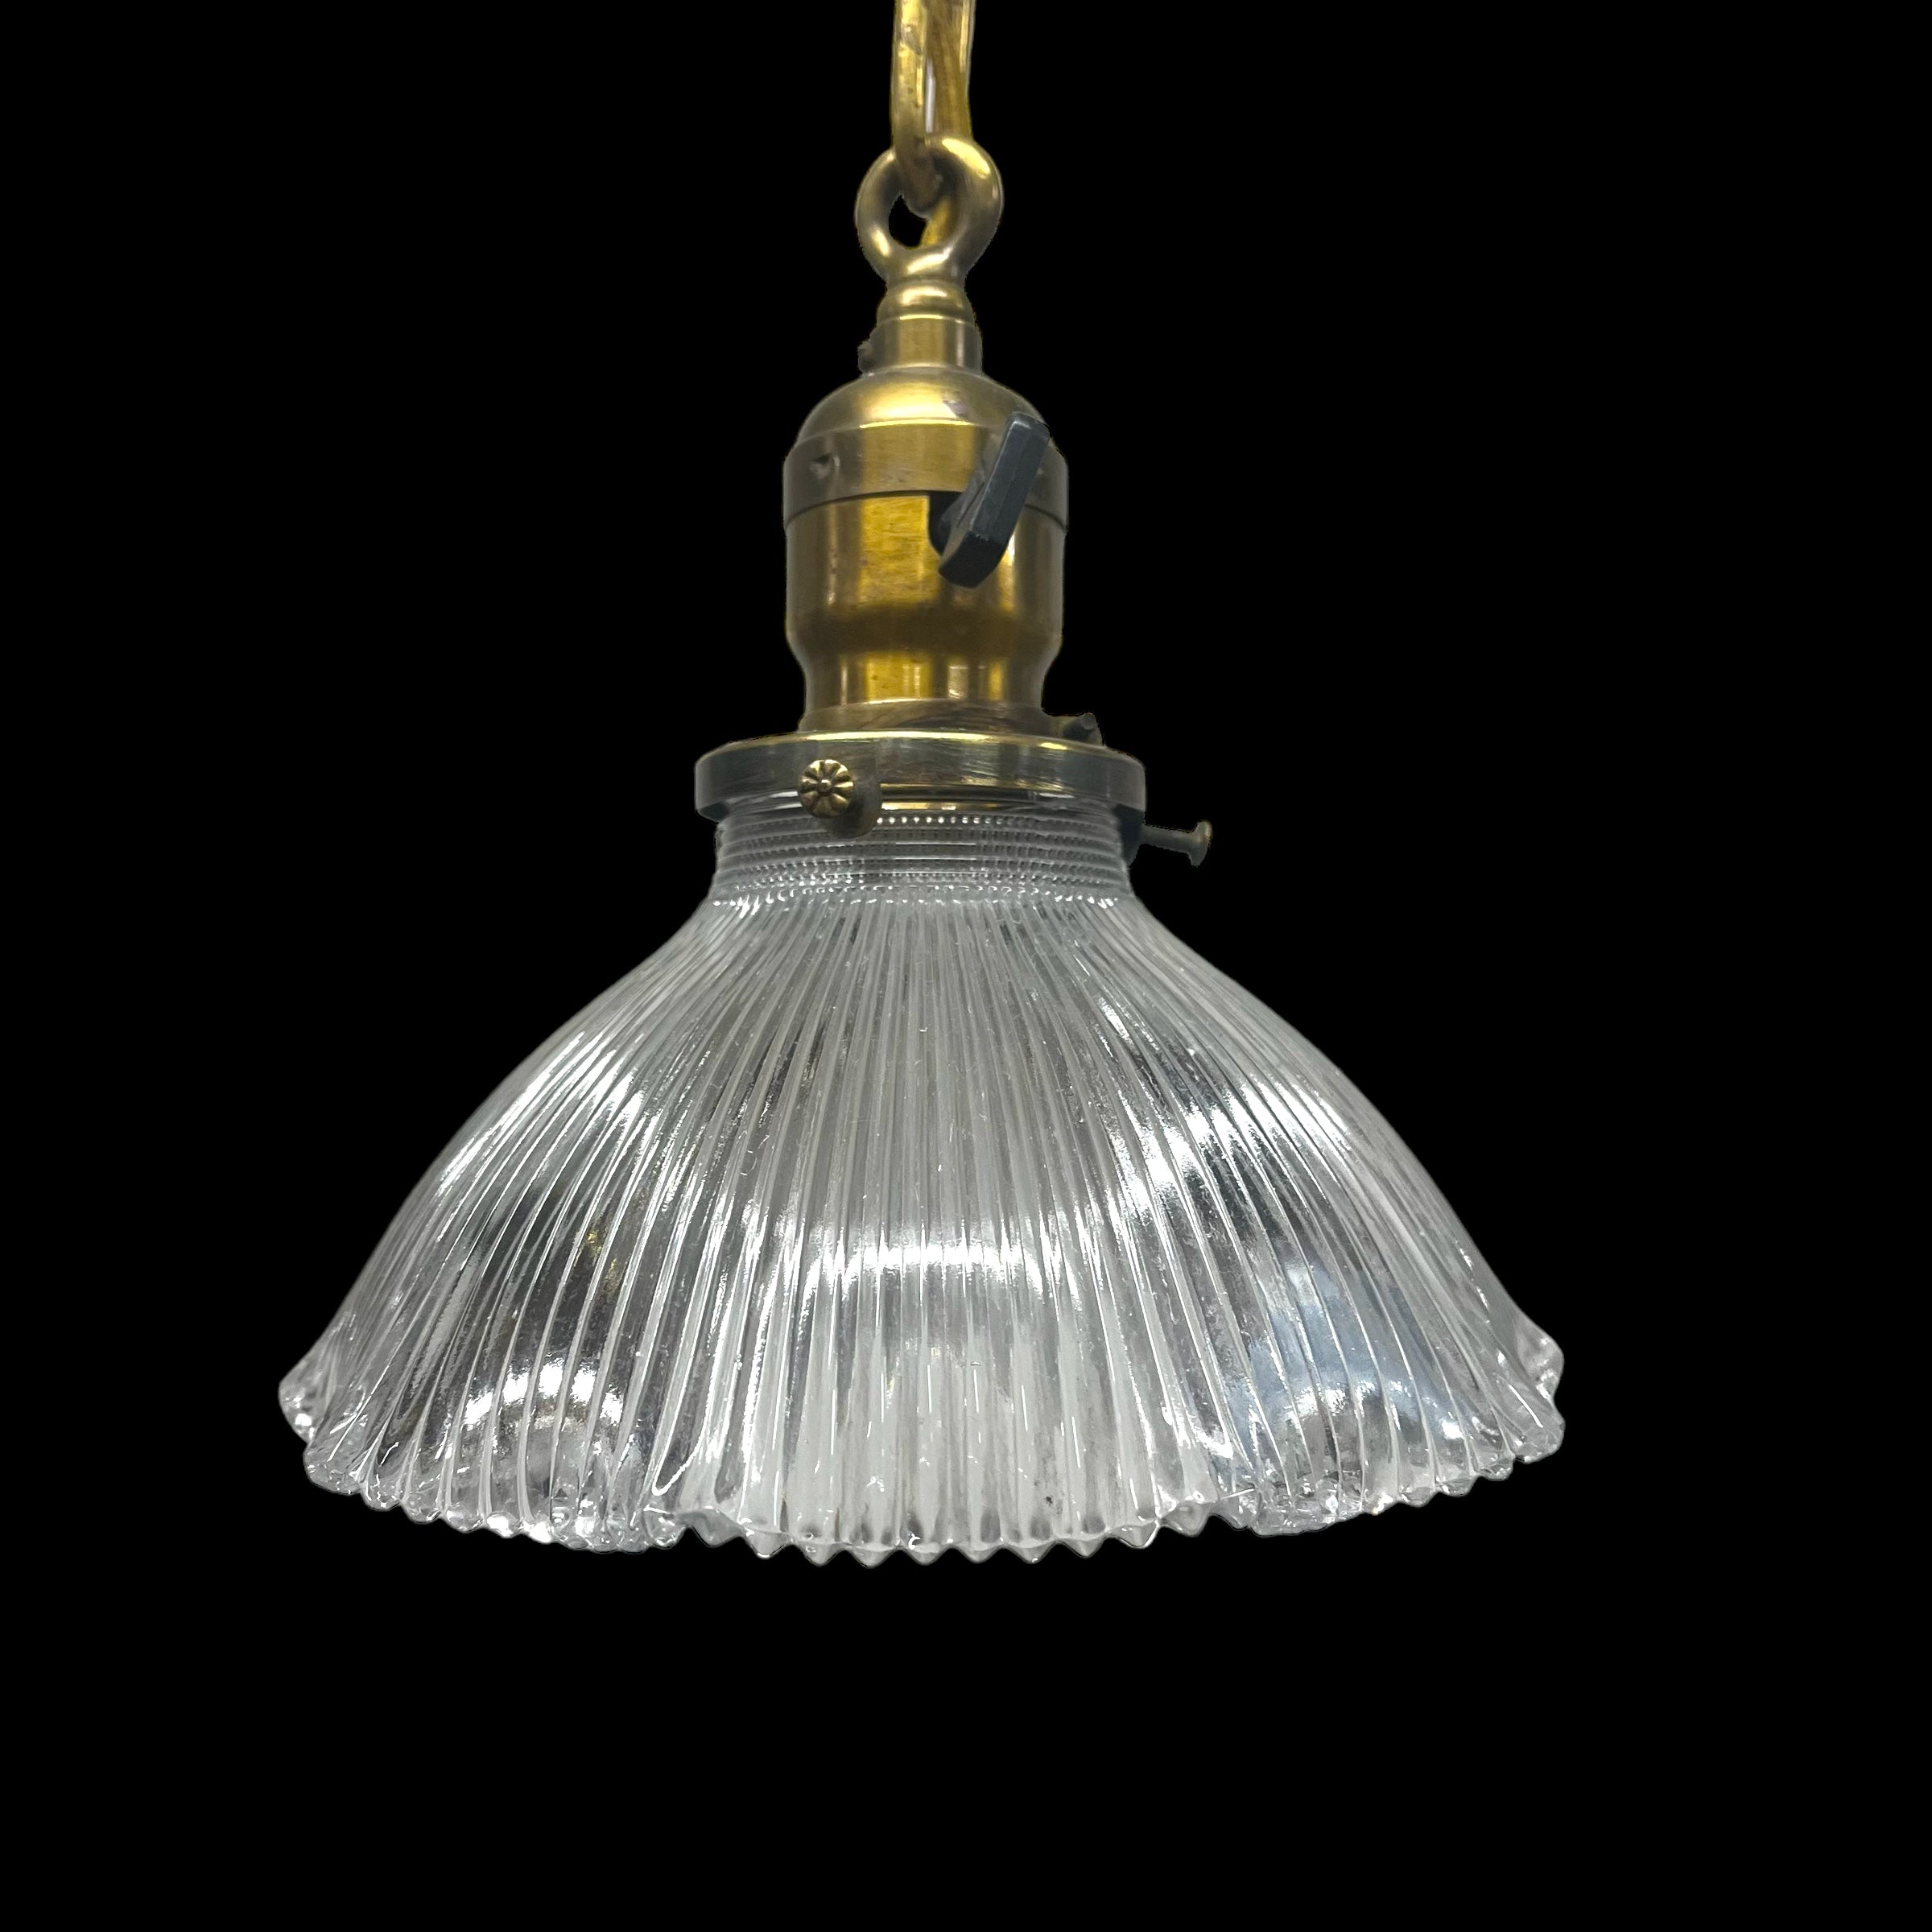 Antique Brass Pendant Light with Ruffled Edge Holophane Glass Shade - Rewired